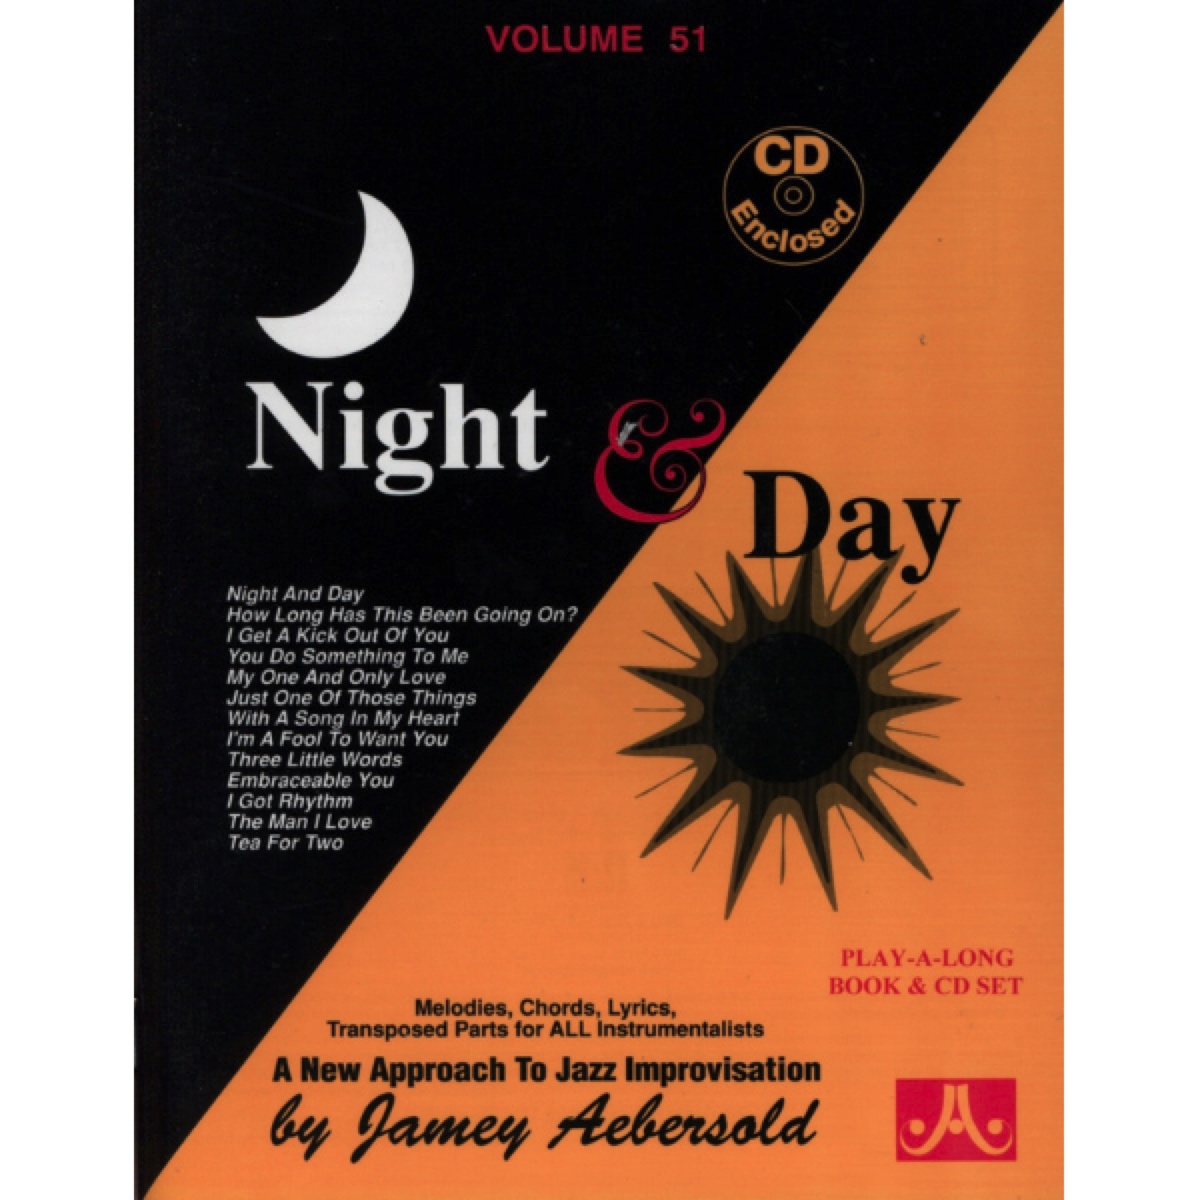 Aebersold vol. 51: Night And Day